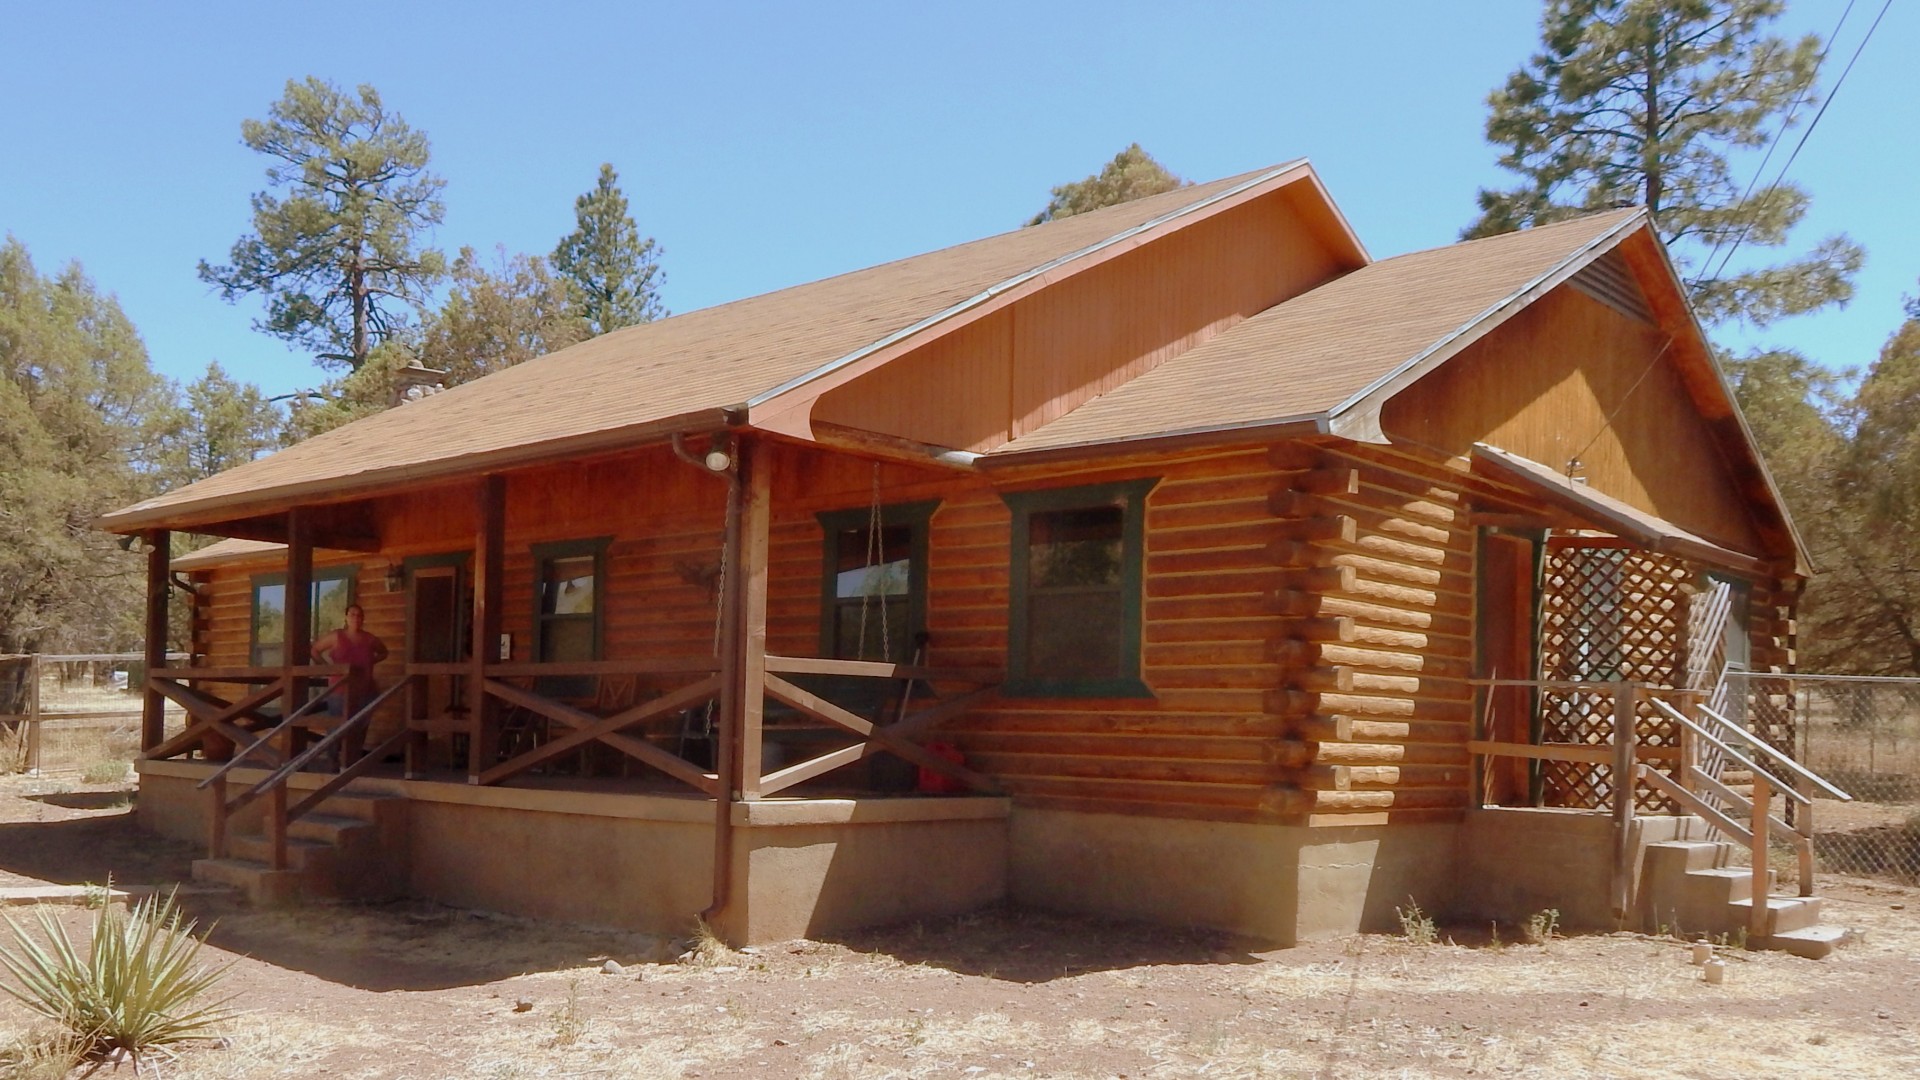 New Mexico | Silver City | 9.97 Acreage W/ Homes - Land and Ranch Sales